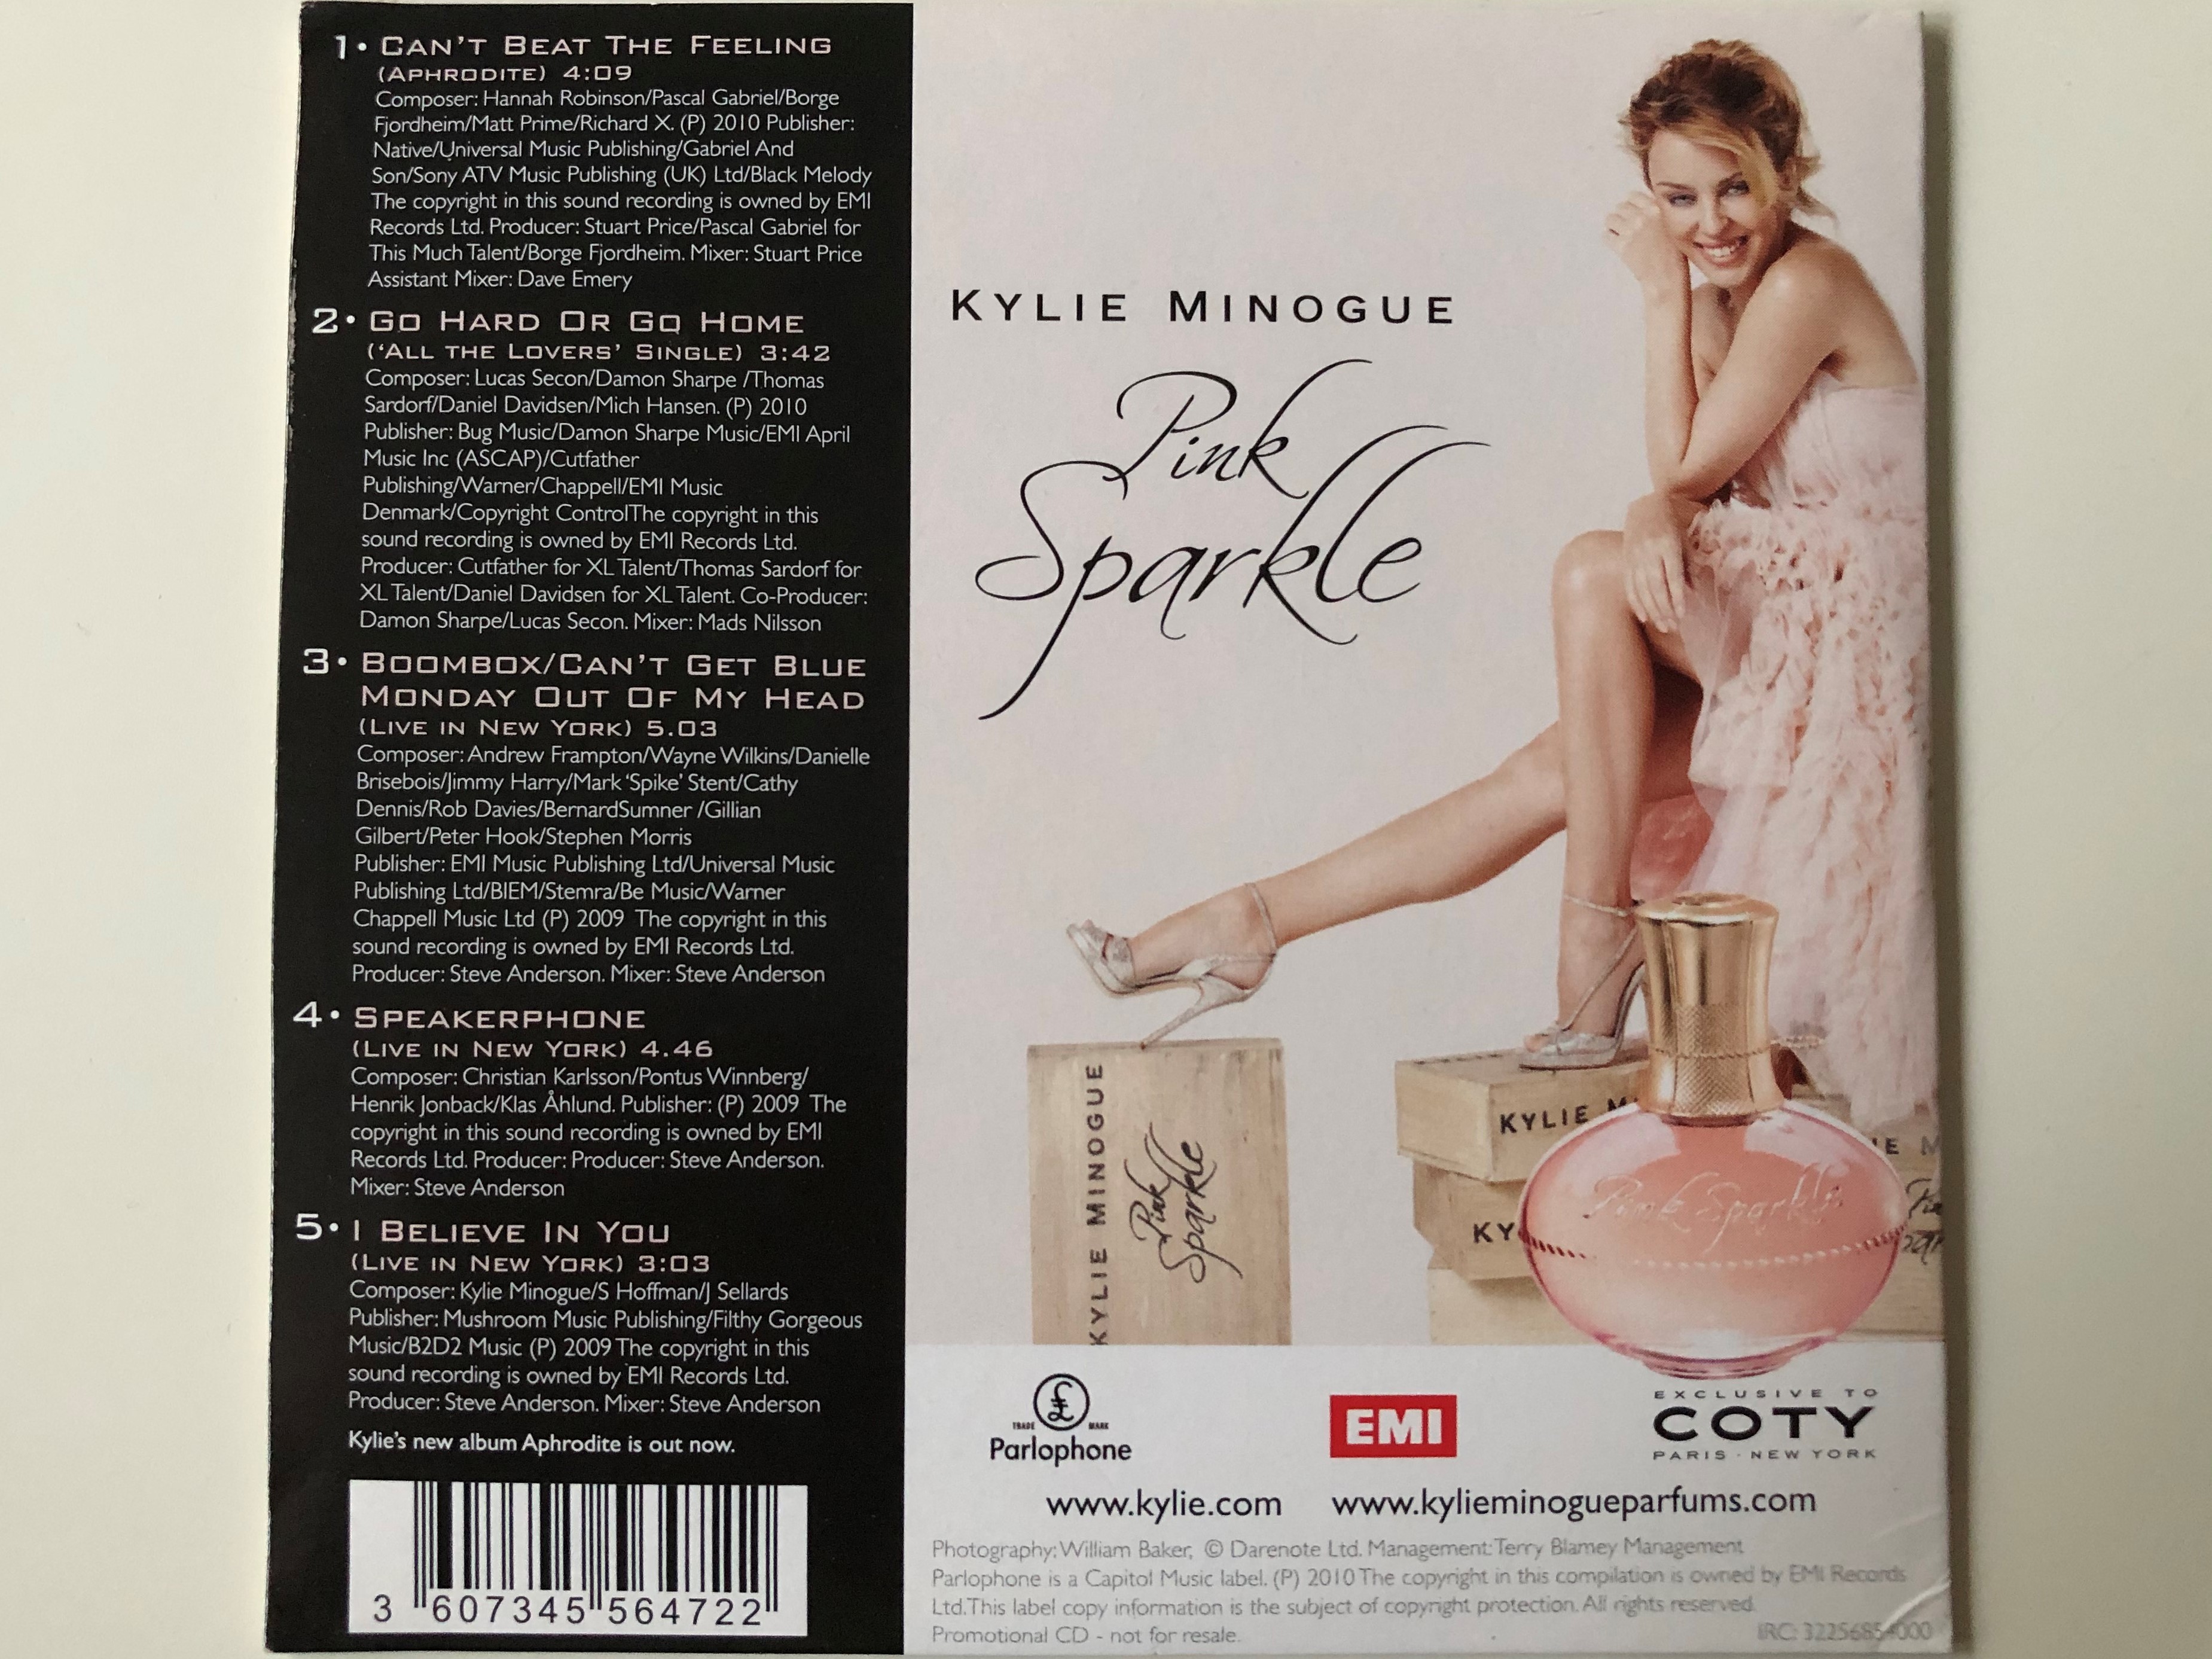 kylie-minogue-pink-sparkle-the-exclusive-cd-the-exclusive-fragrance-parlophone-audio-cd-2010-3607345564722-3-.jpg